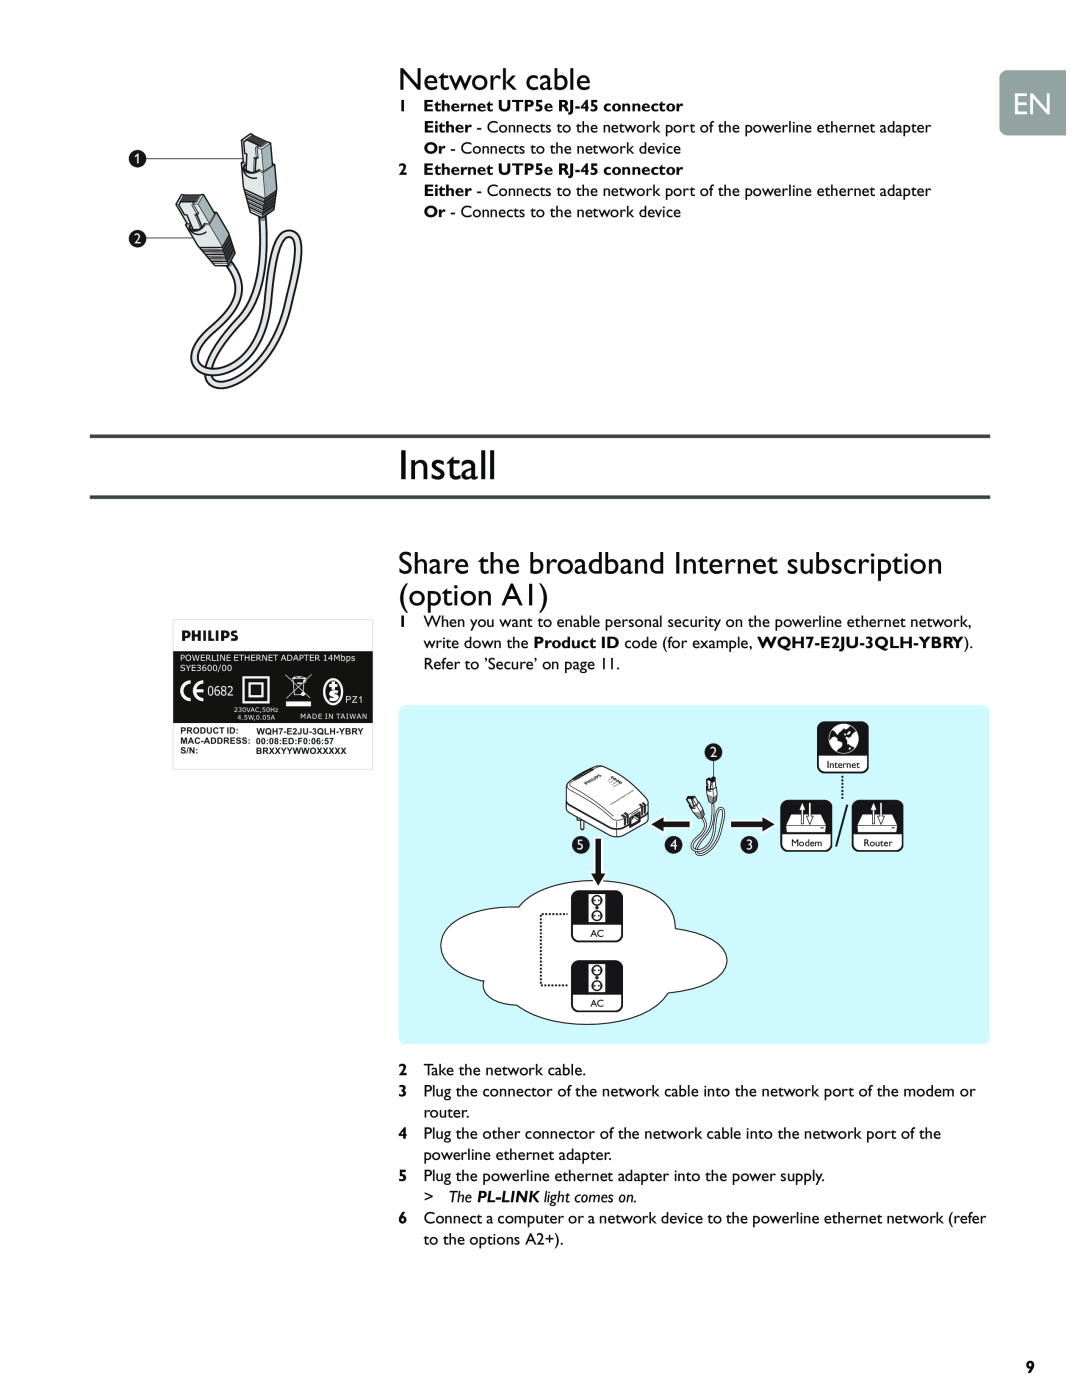 Philips SYE5600 user manual Install, Network cable, Share the broadband Internet subscription option A1 